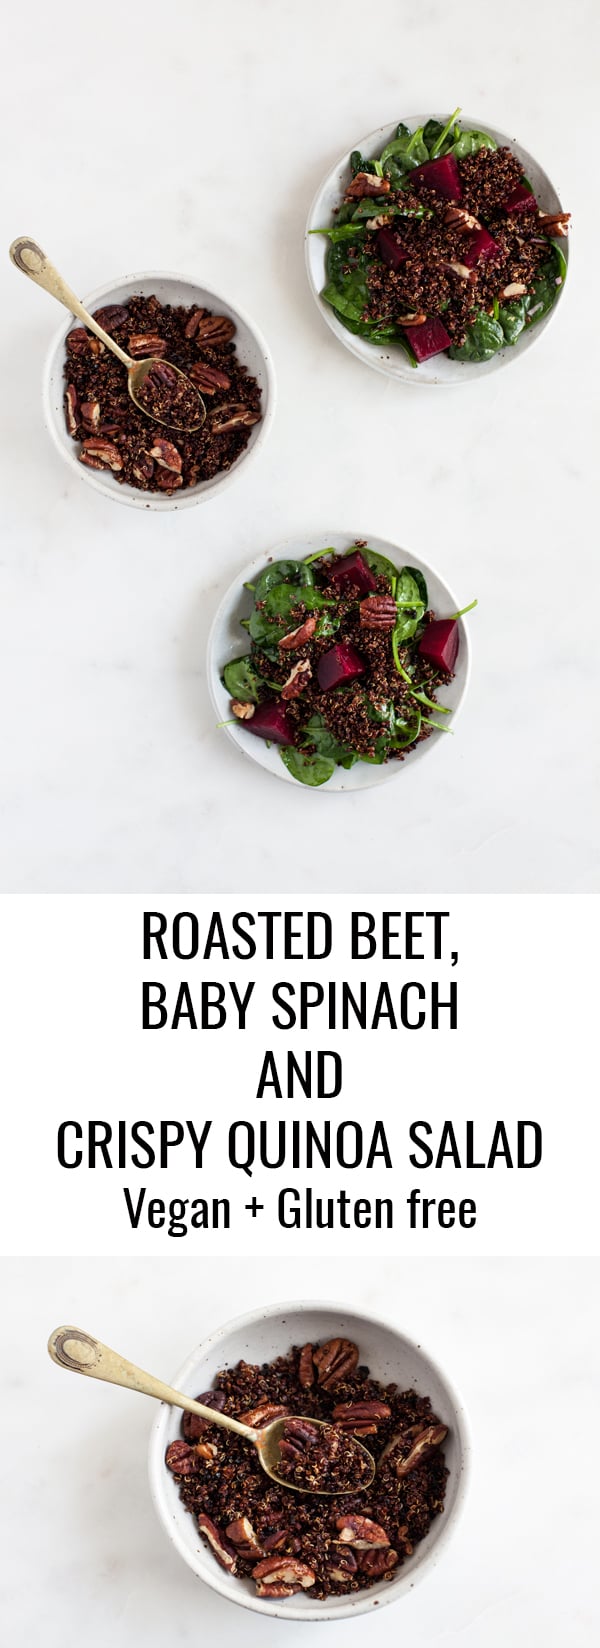 Roasted Beet, Baby Spinach, and Toasted Quinoa Salad -- perfect for holiday meals and entertaining!| The Full Helping